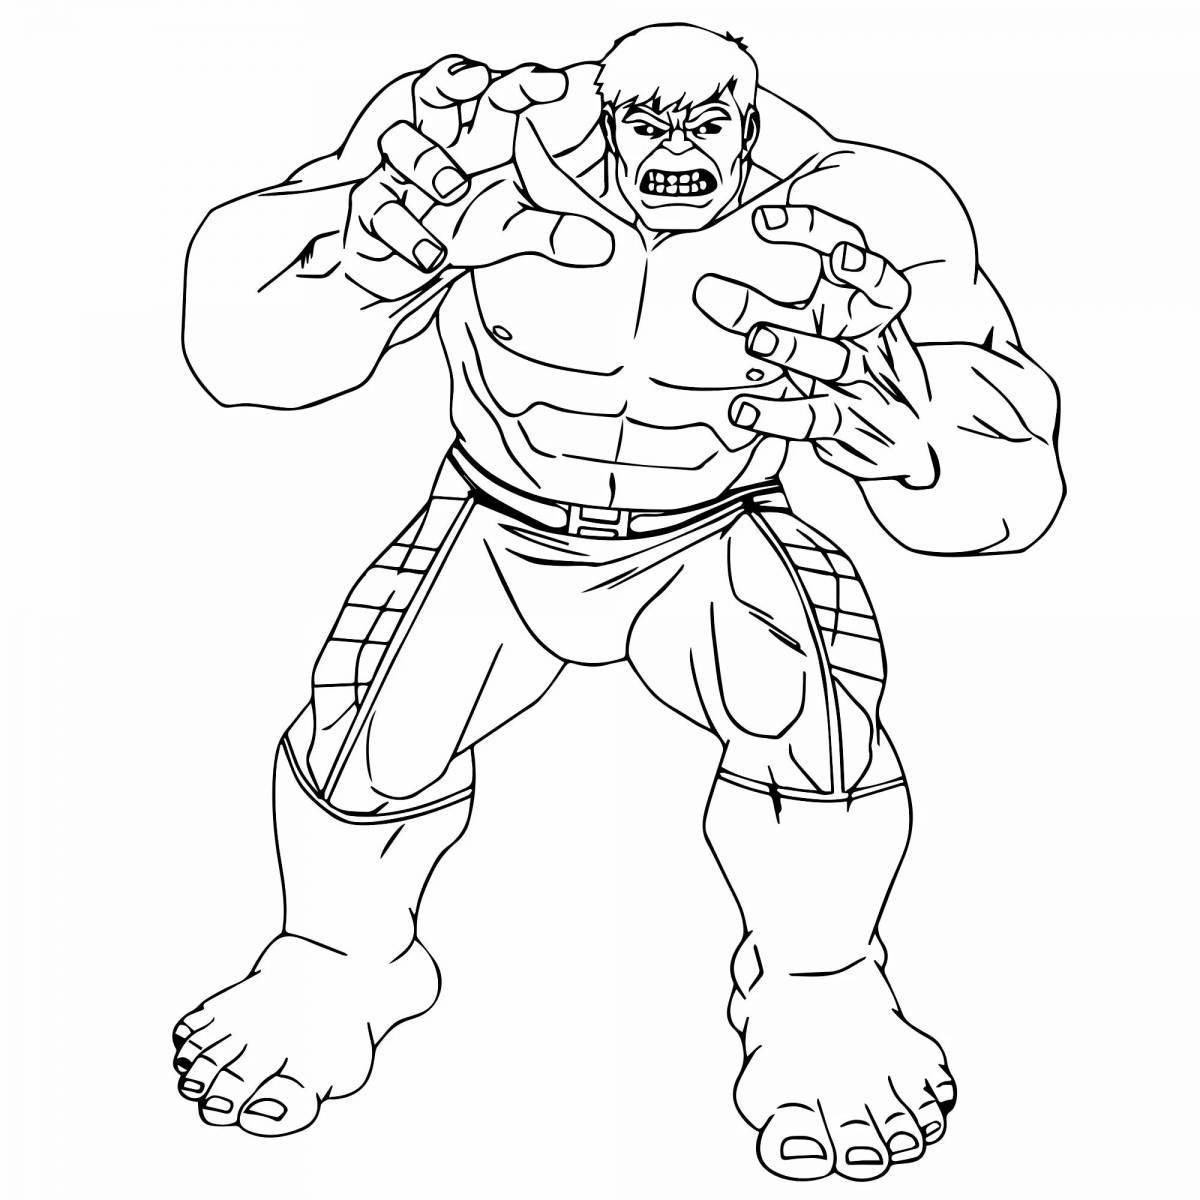 Fantastic Hulk coloring book for 5-6 year olds